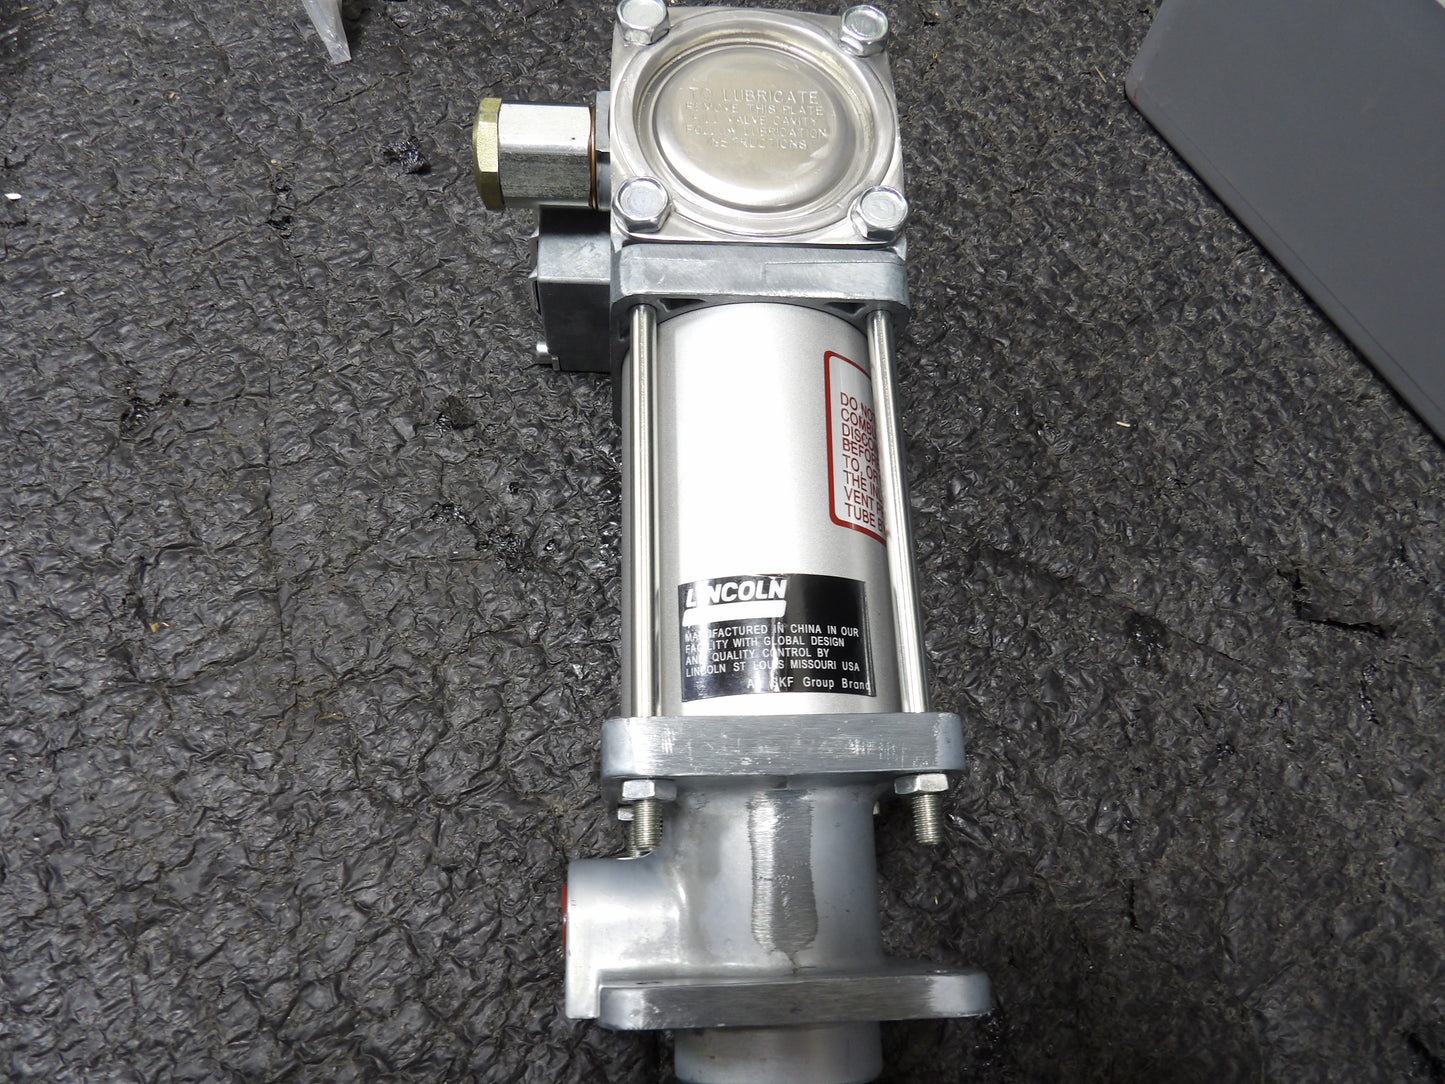 Lincoln 82054 Grease Pump, Heavy Duty, 50:1, For 400 Lb. Drum (Pump Only) (CR00798-WTA22)